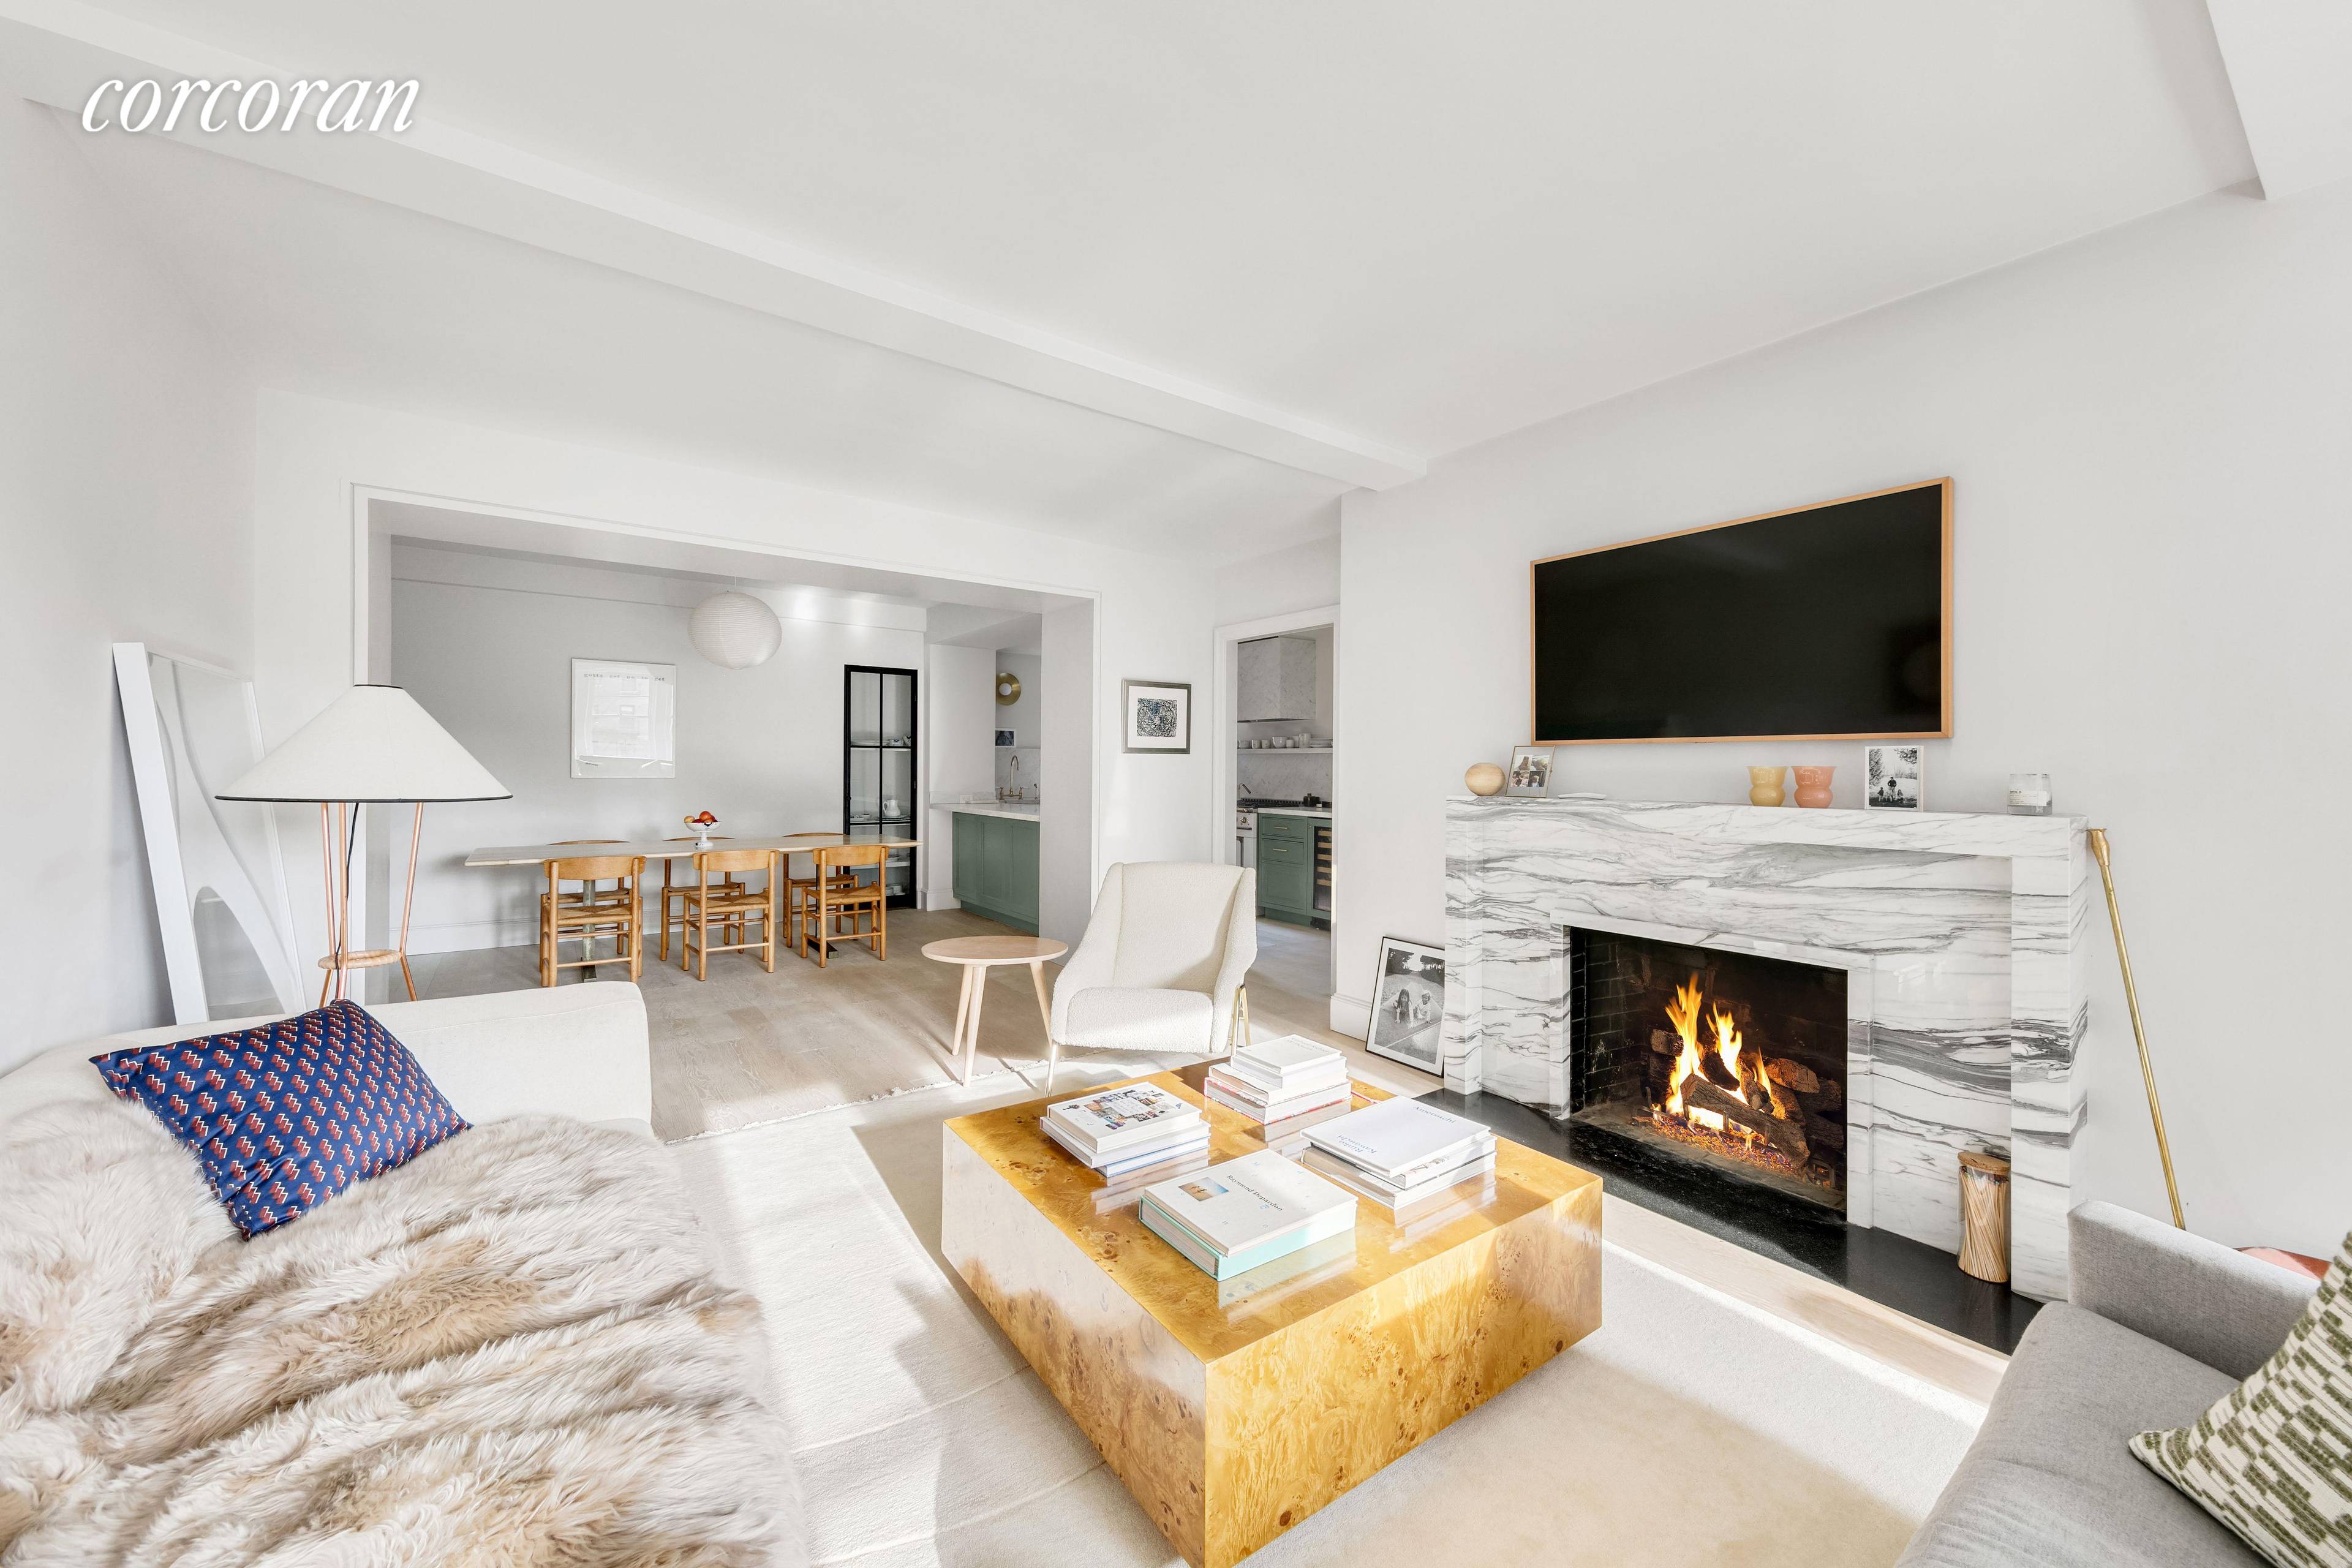 Stunning, triple mint three bedroom home at 59 West 12th Street, a highly sought after full service Bing and Bing prewar condominium in the heart of Greenwich Village.